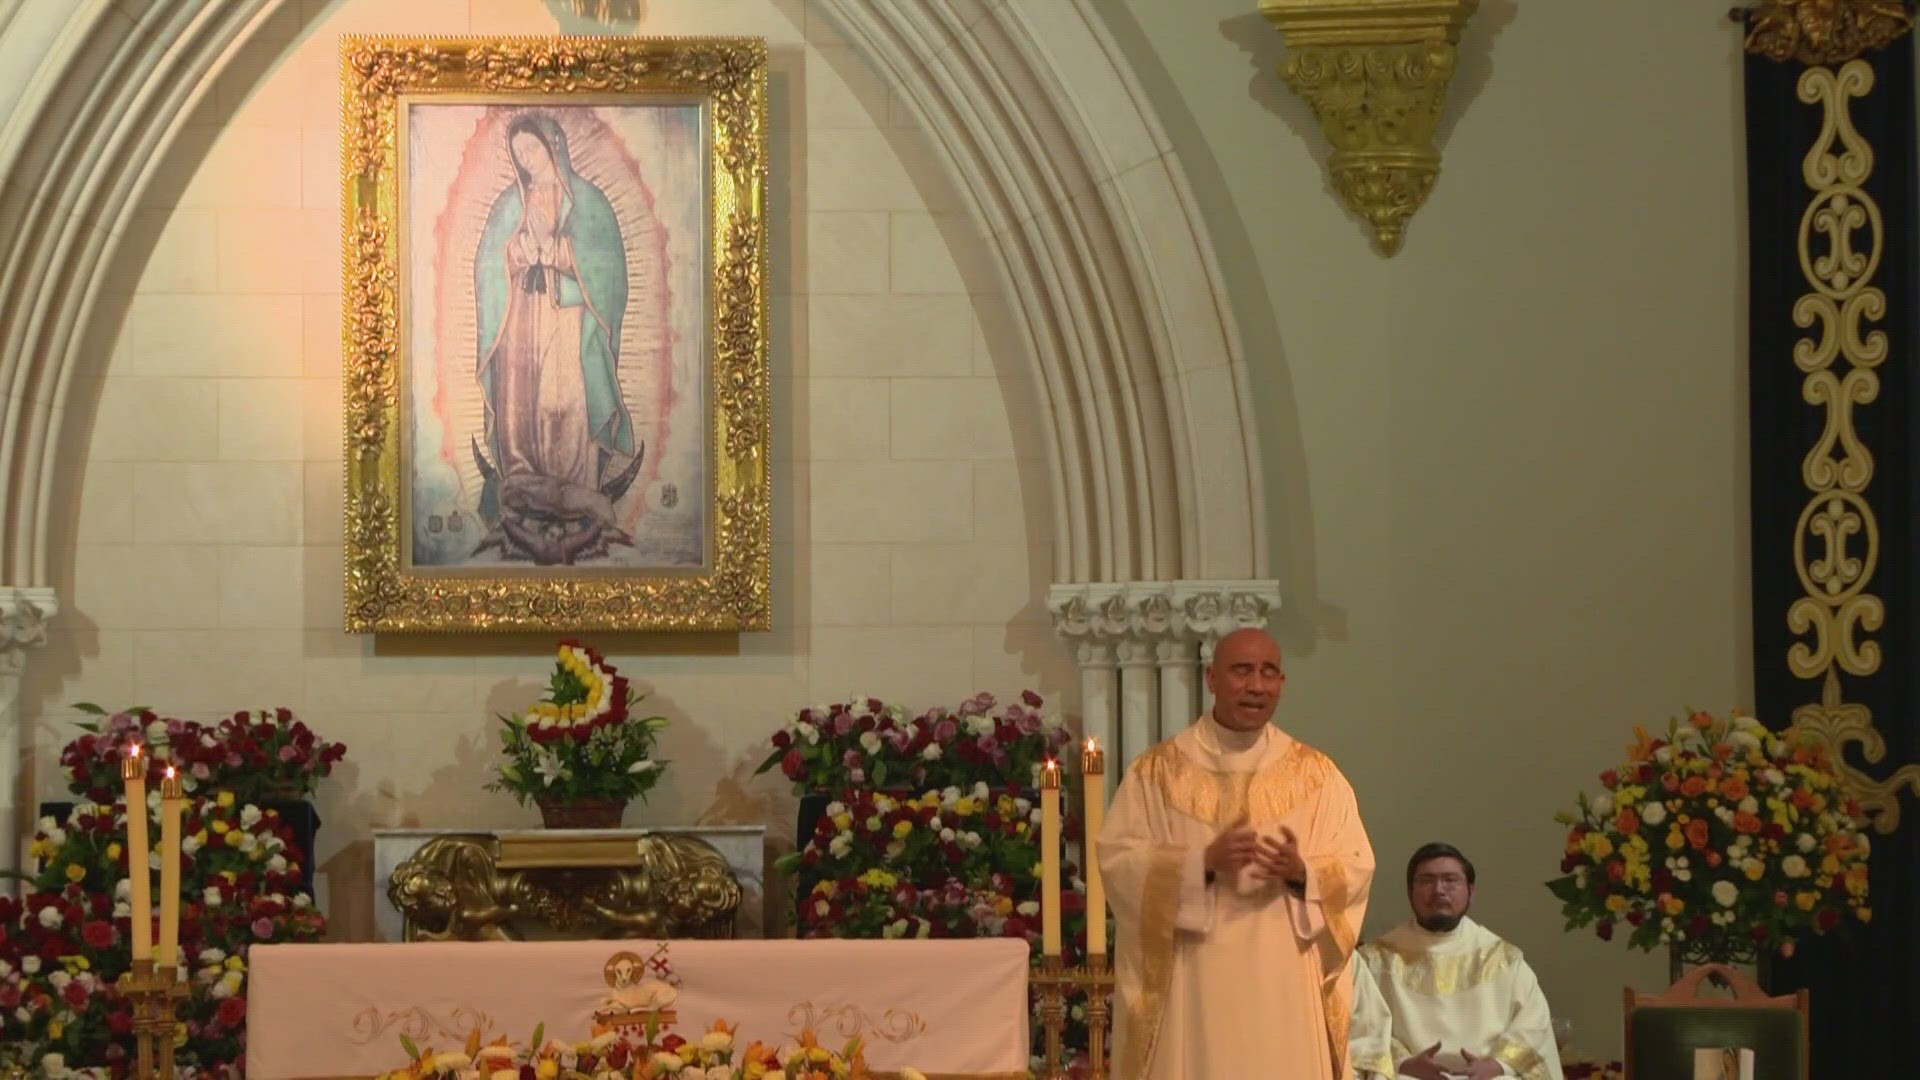 "Through her presence she brings forth justice and peace in the world, Bishop Burns told WFAA.